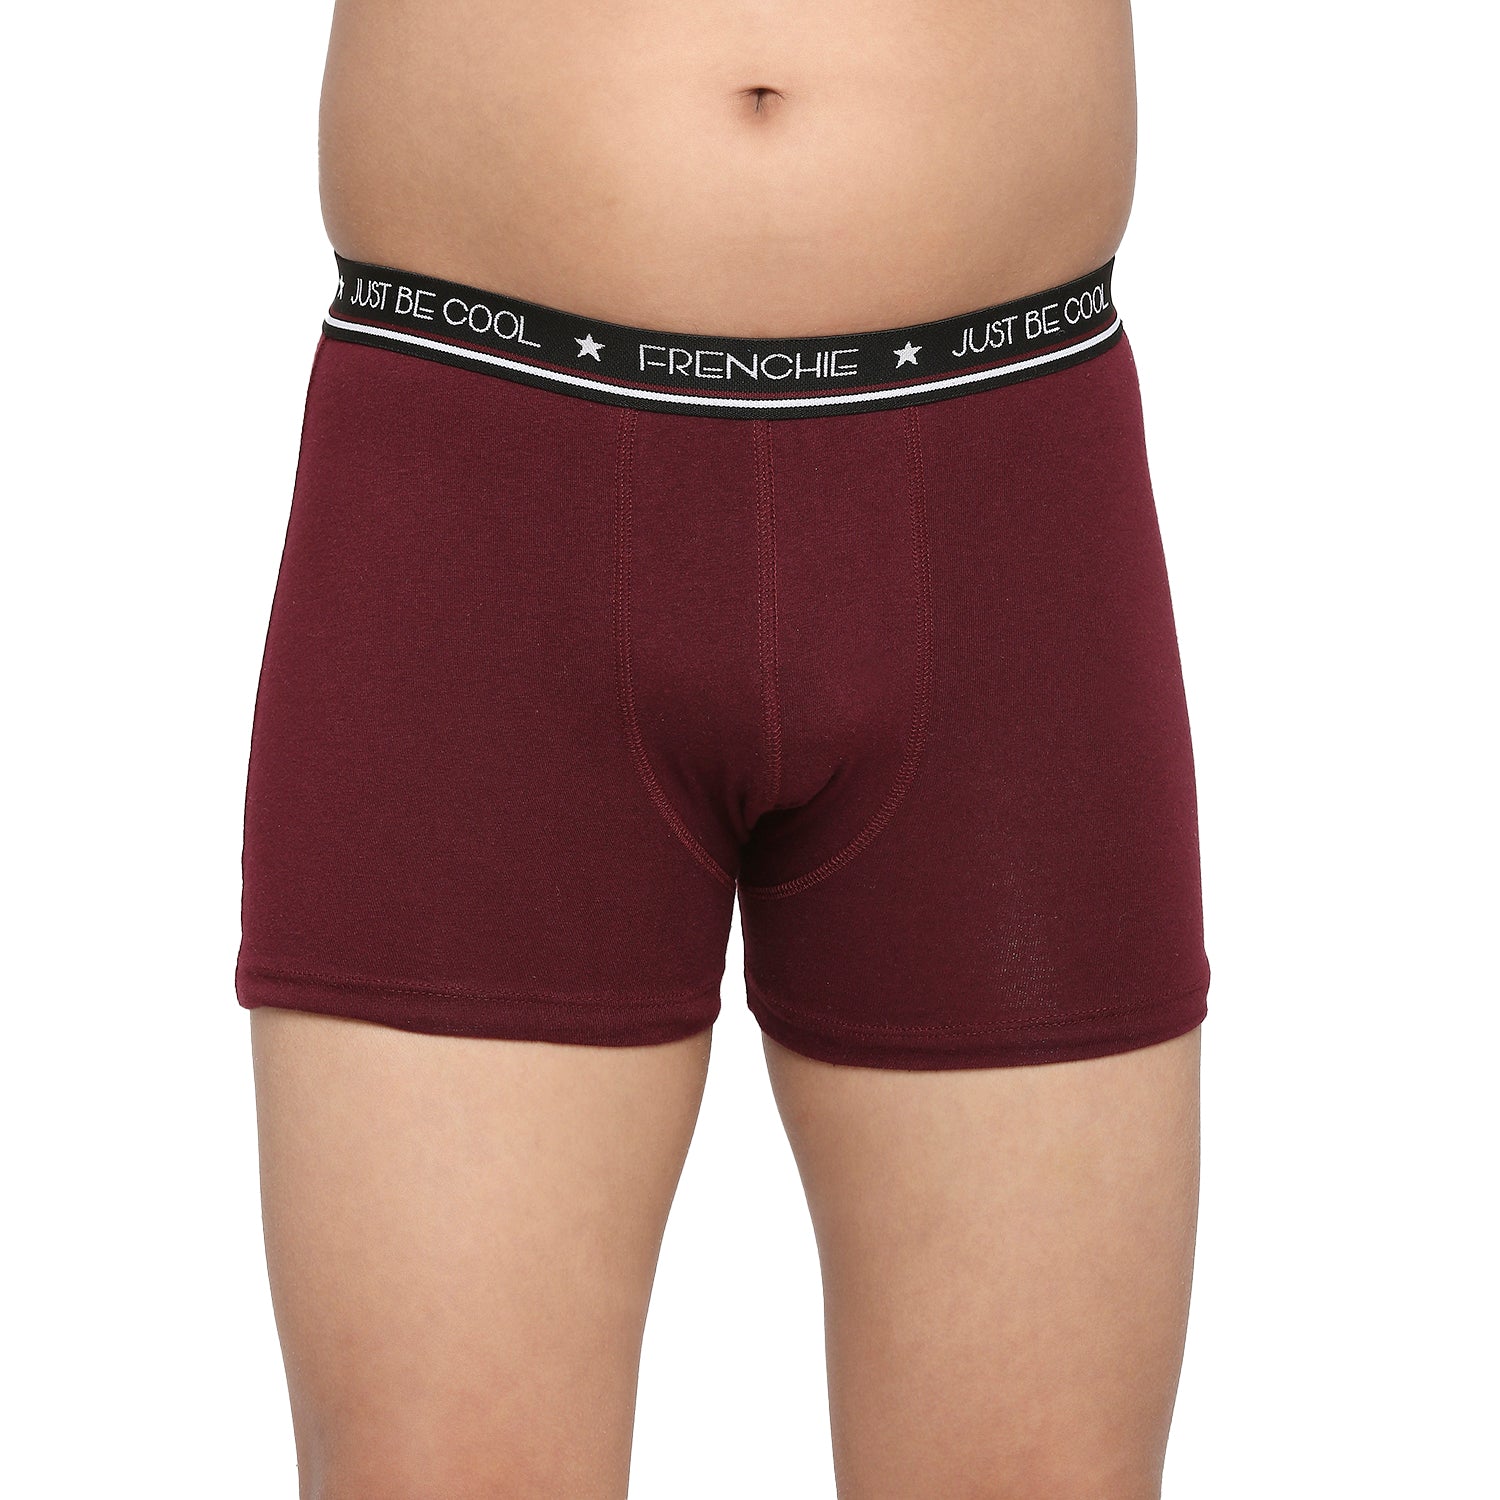 FRENCHIE Teenagers Cotton Trunk Wine and Light Gray - Pack of 2